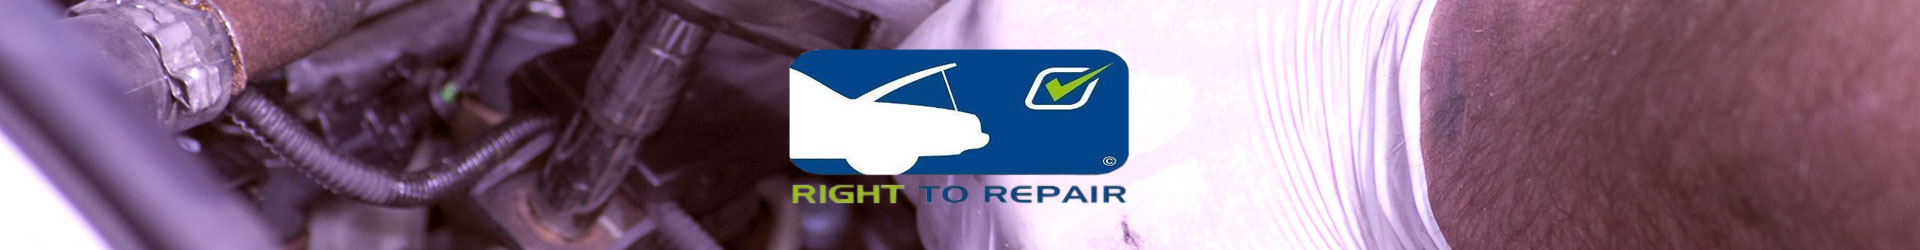 Worldwide Car Parts BER & Right To Reapir Header Image.